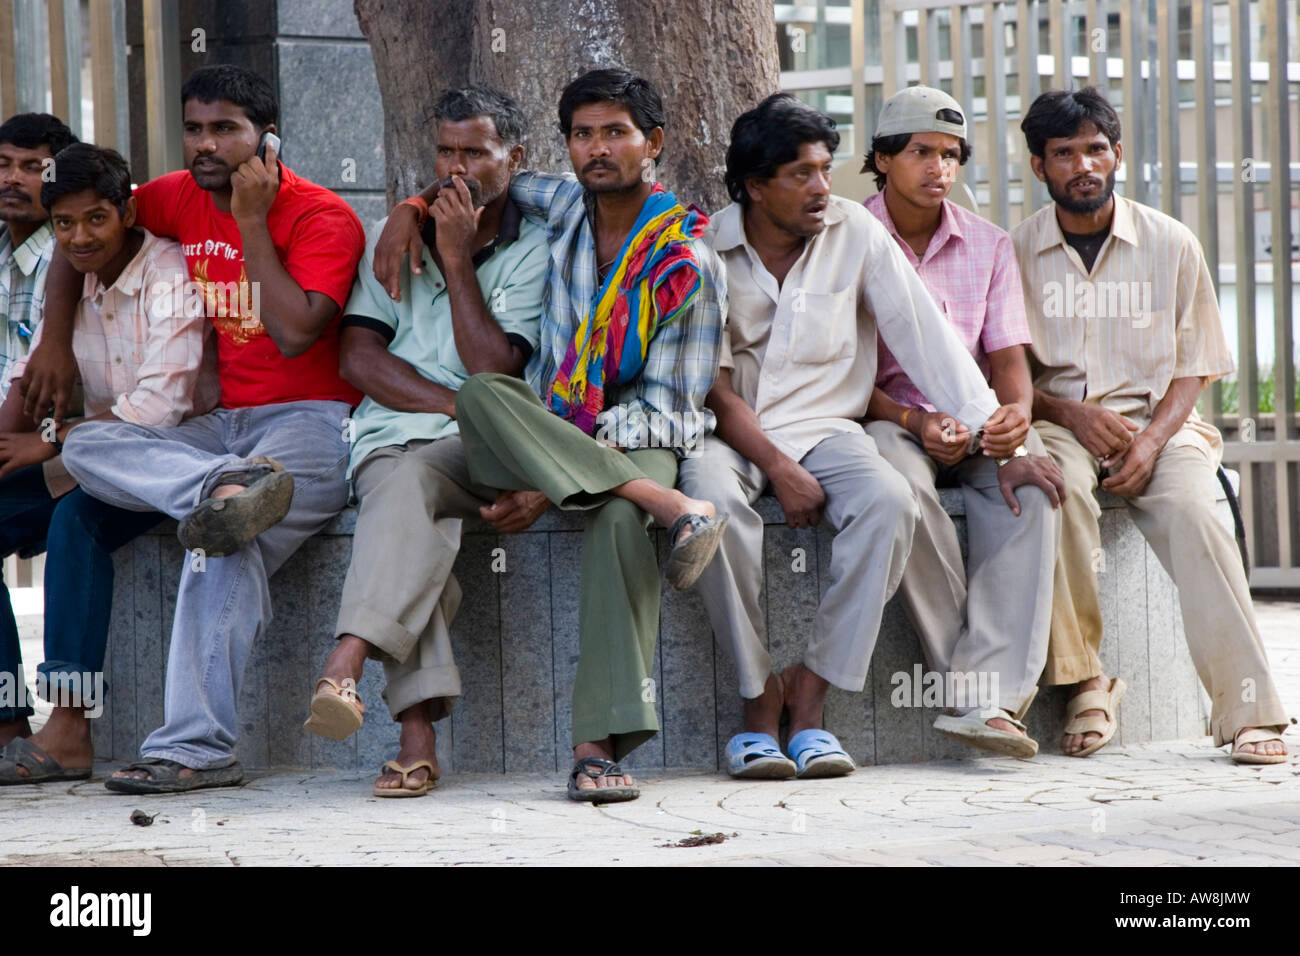 Affection shown amongst all male group of Indian friends Stock Photo